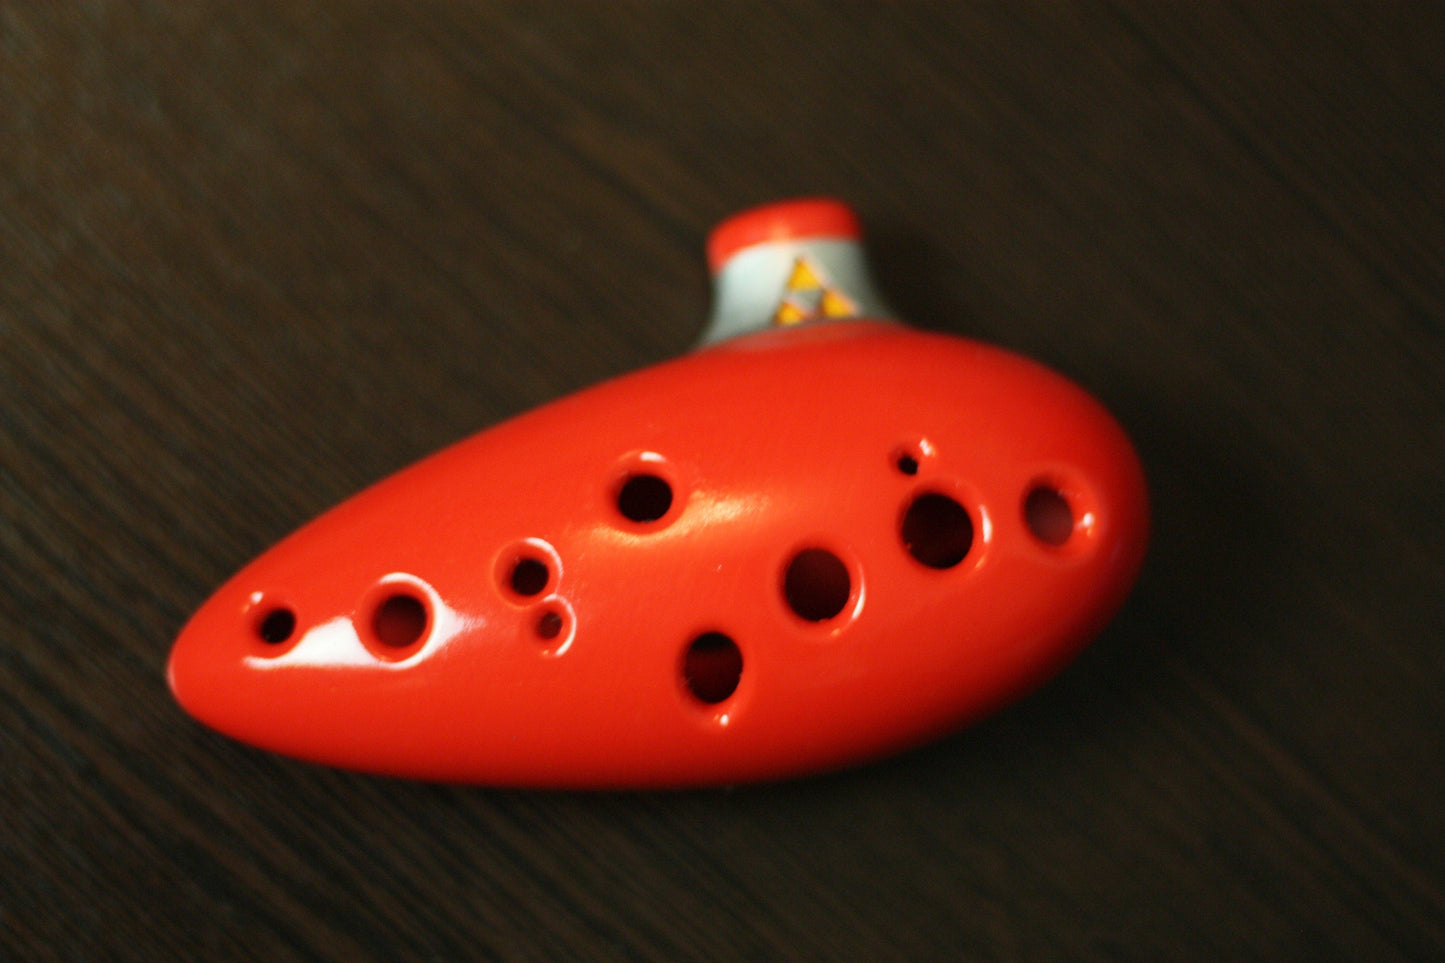 Ocarina of Time from The Legend of Zelda :  3D Printed, Gold, 12 hole musical instrument